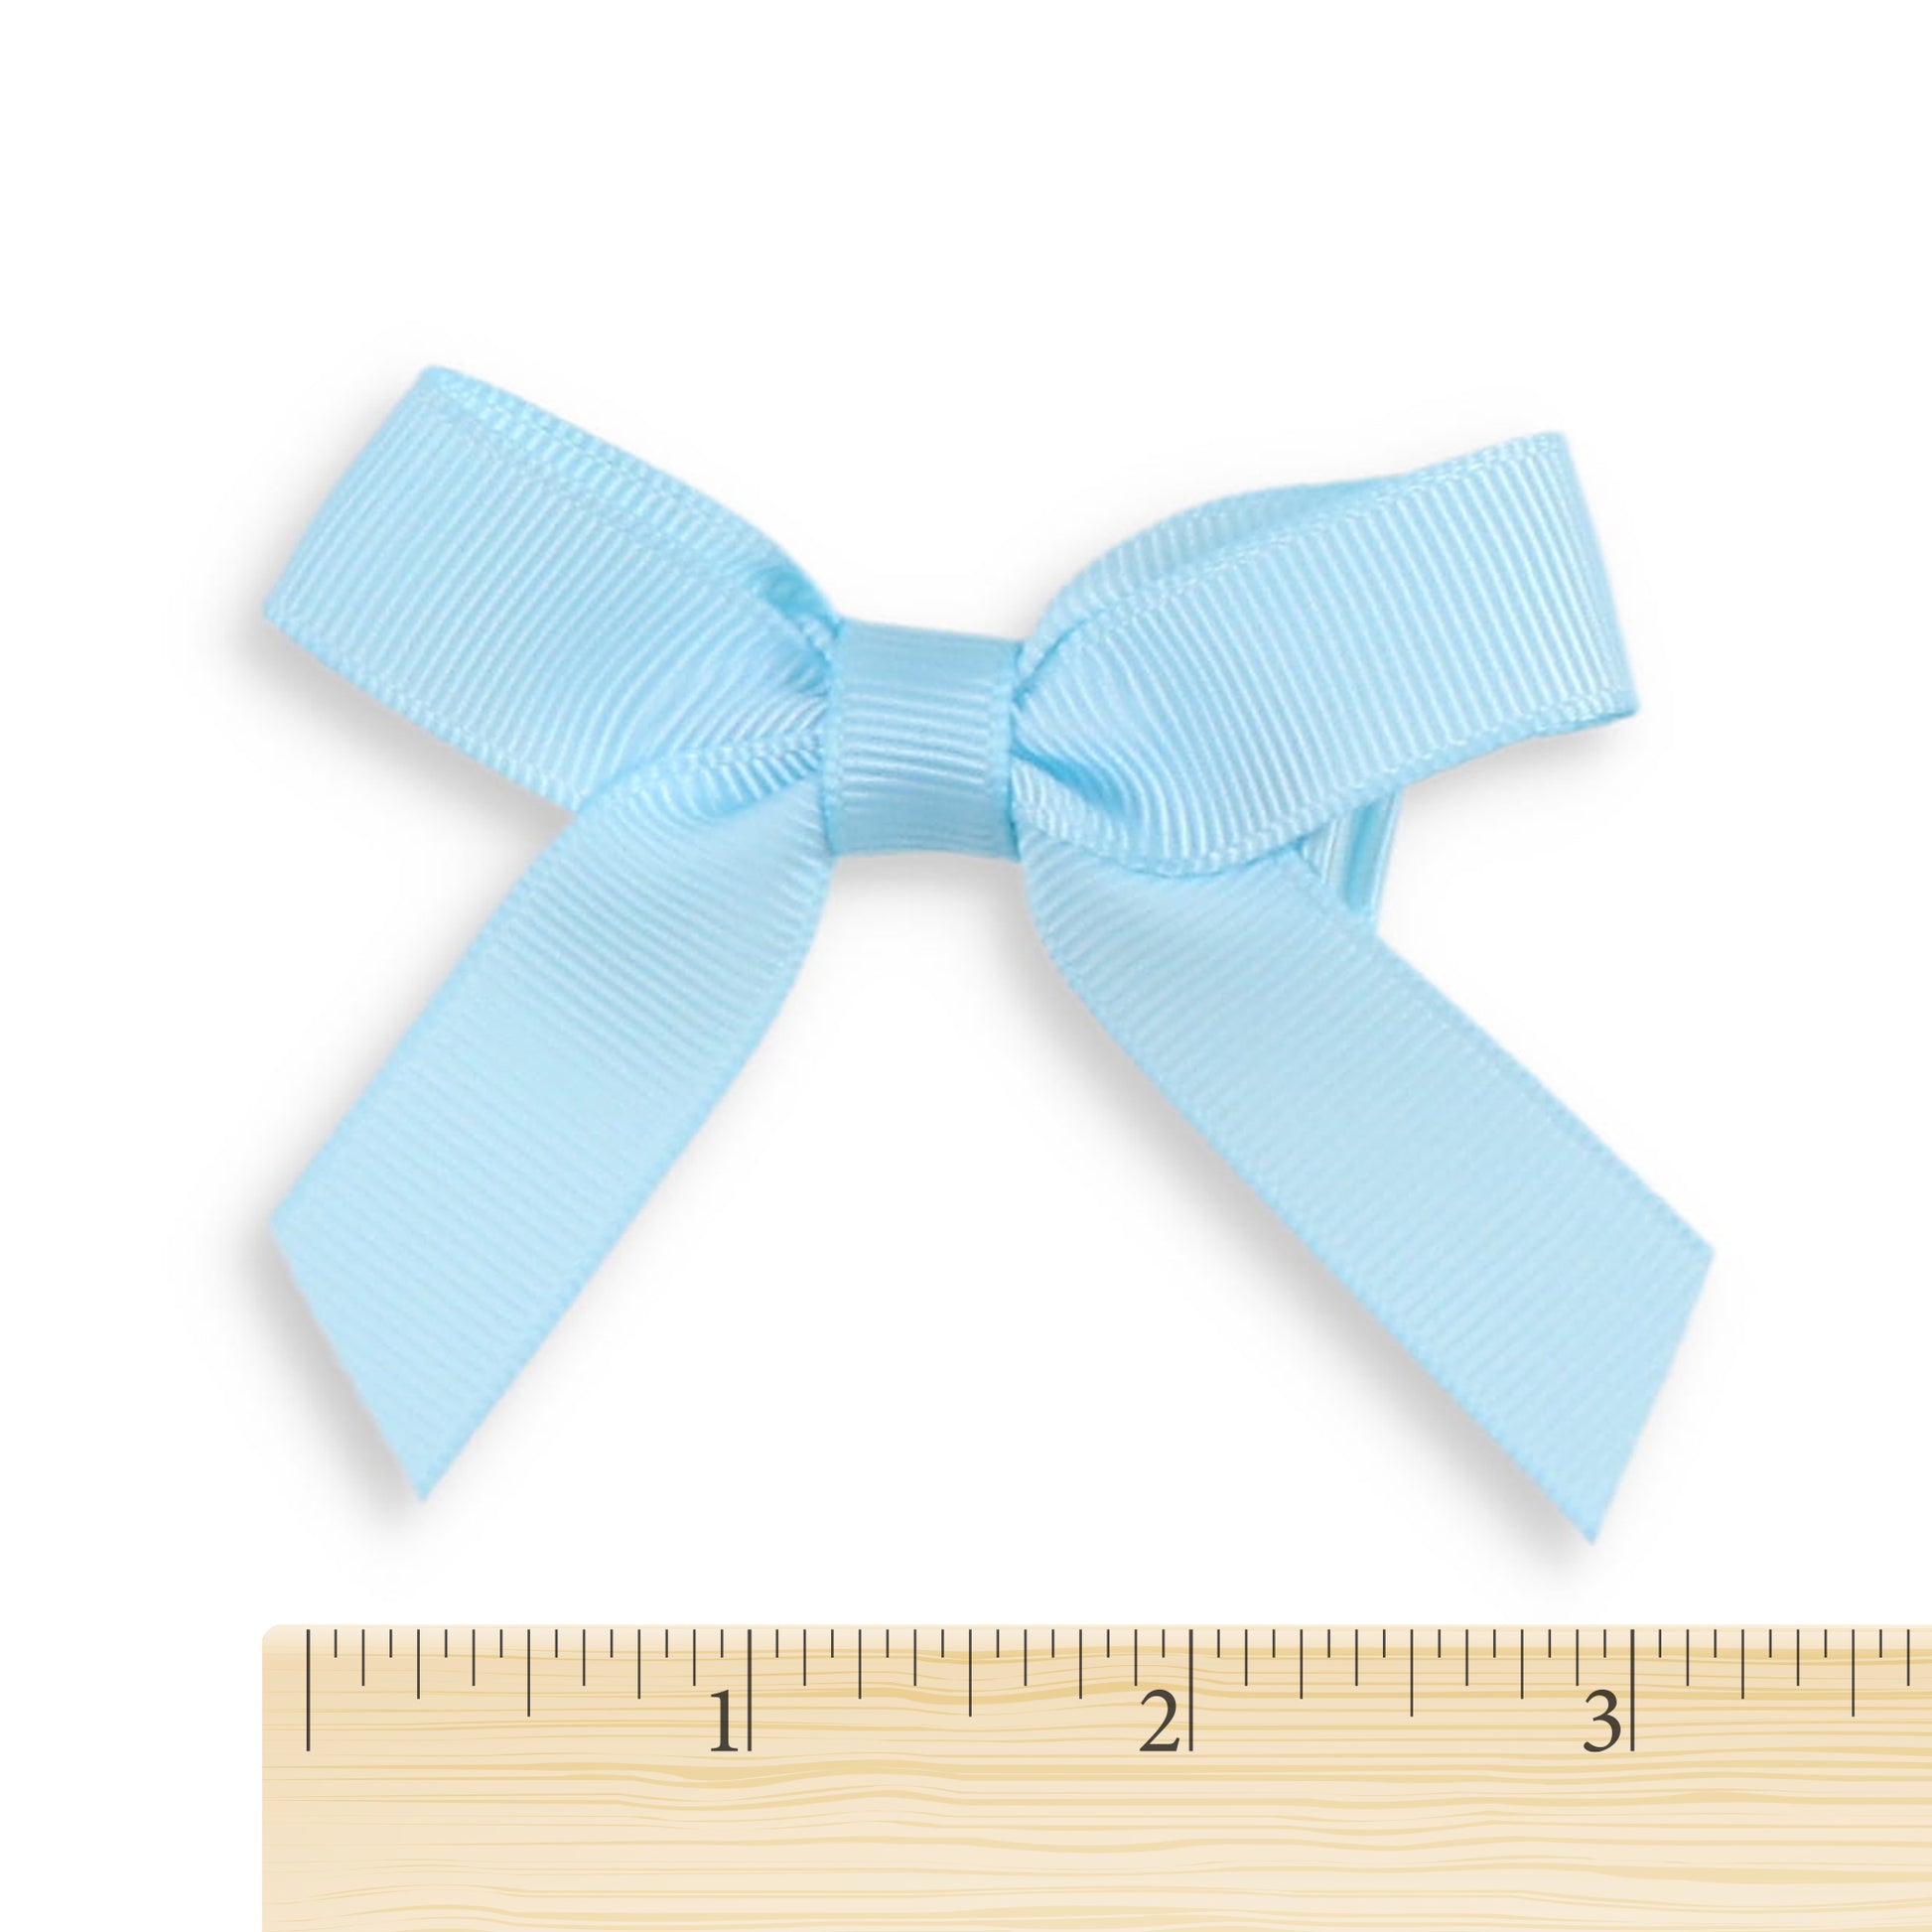 Satin Ribbon Hair Bow with Alligator Clip Dressy Large Bow for Hair, Light Blue